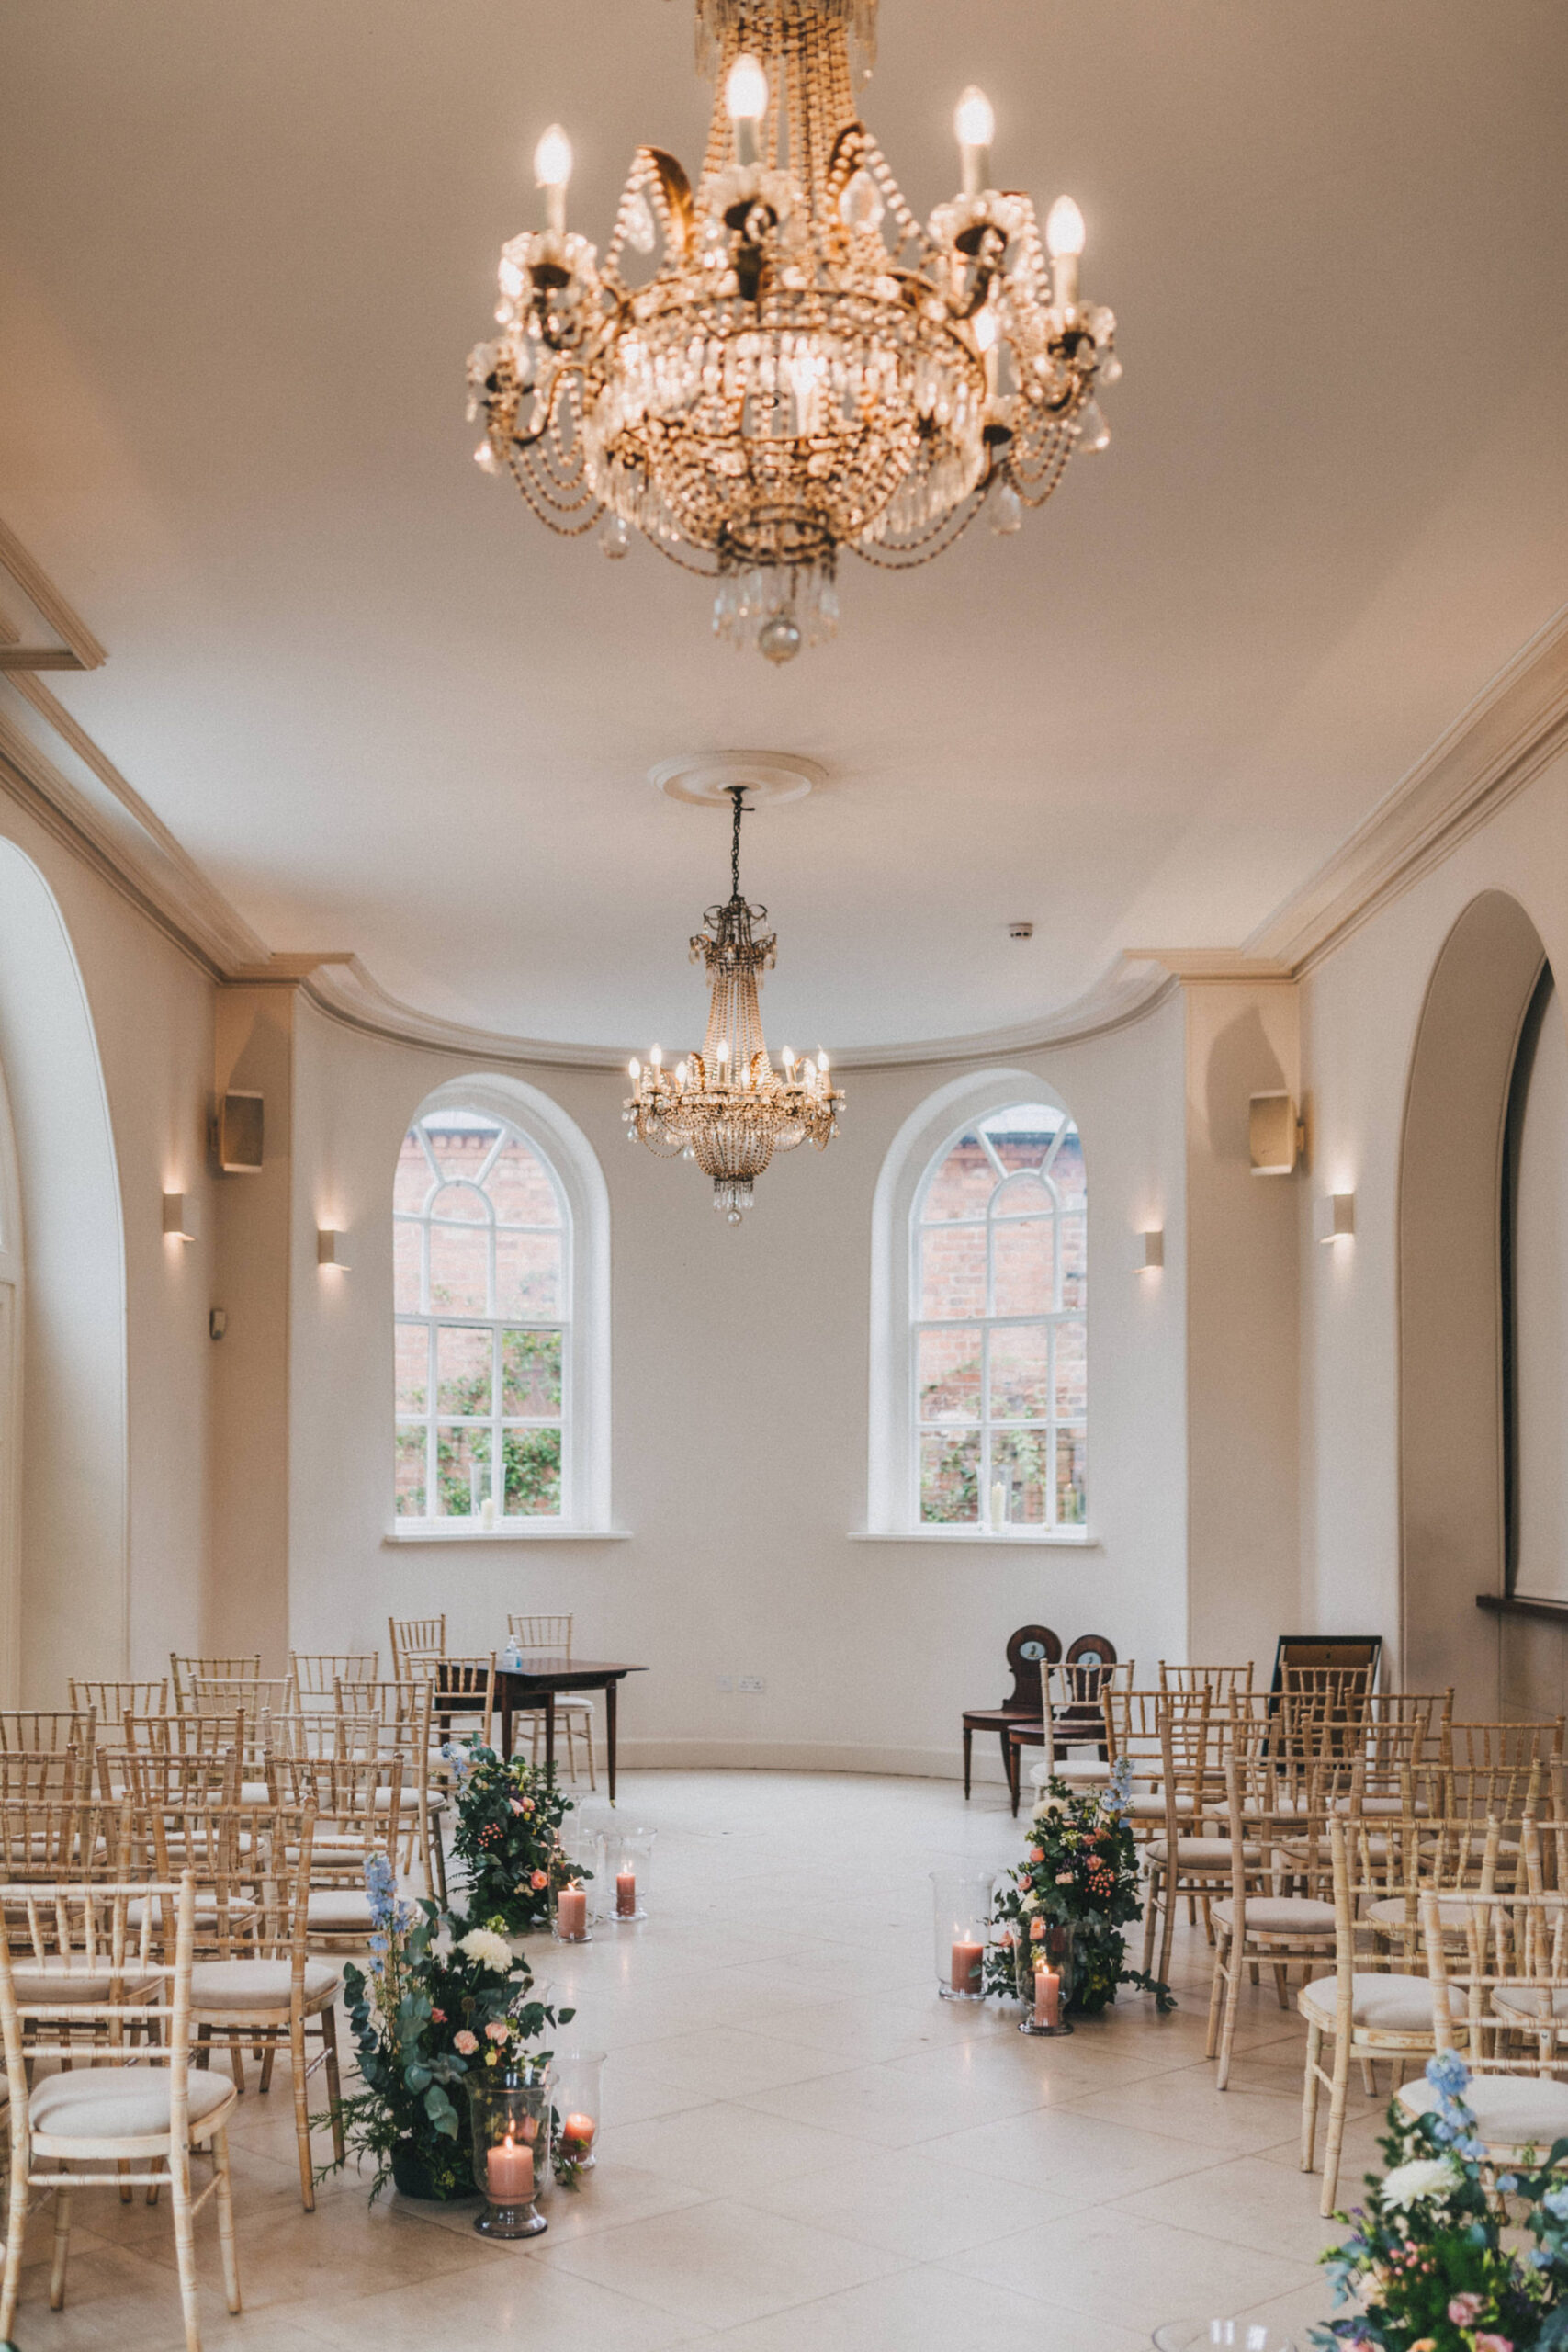 An empty wedding ceremony room with high ceilings and hanging chandeliers with a bow window at the far end